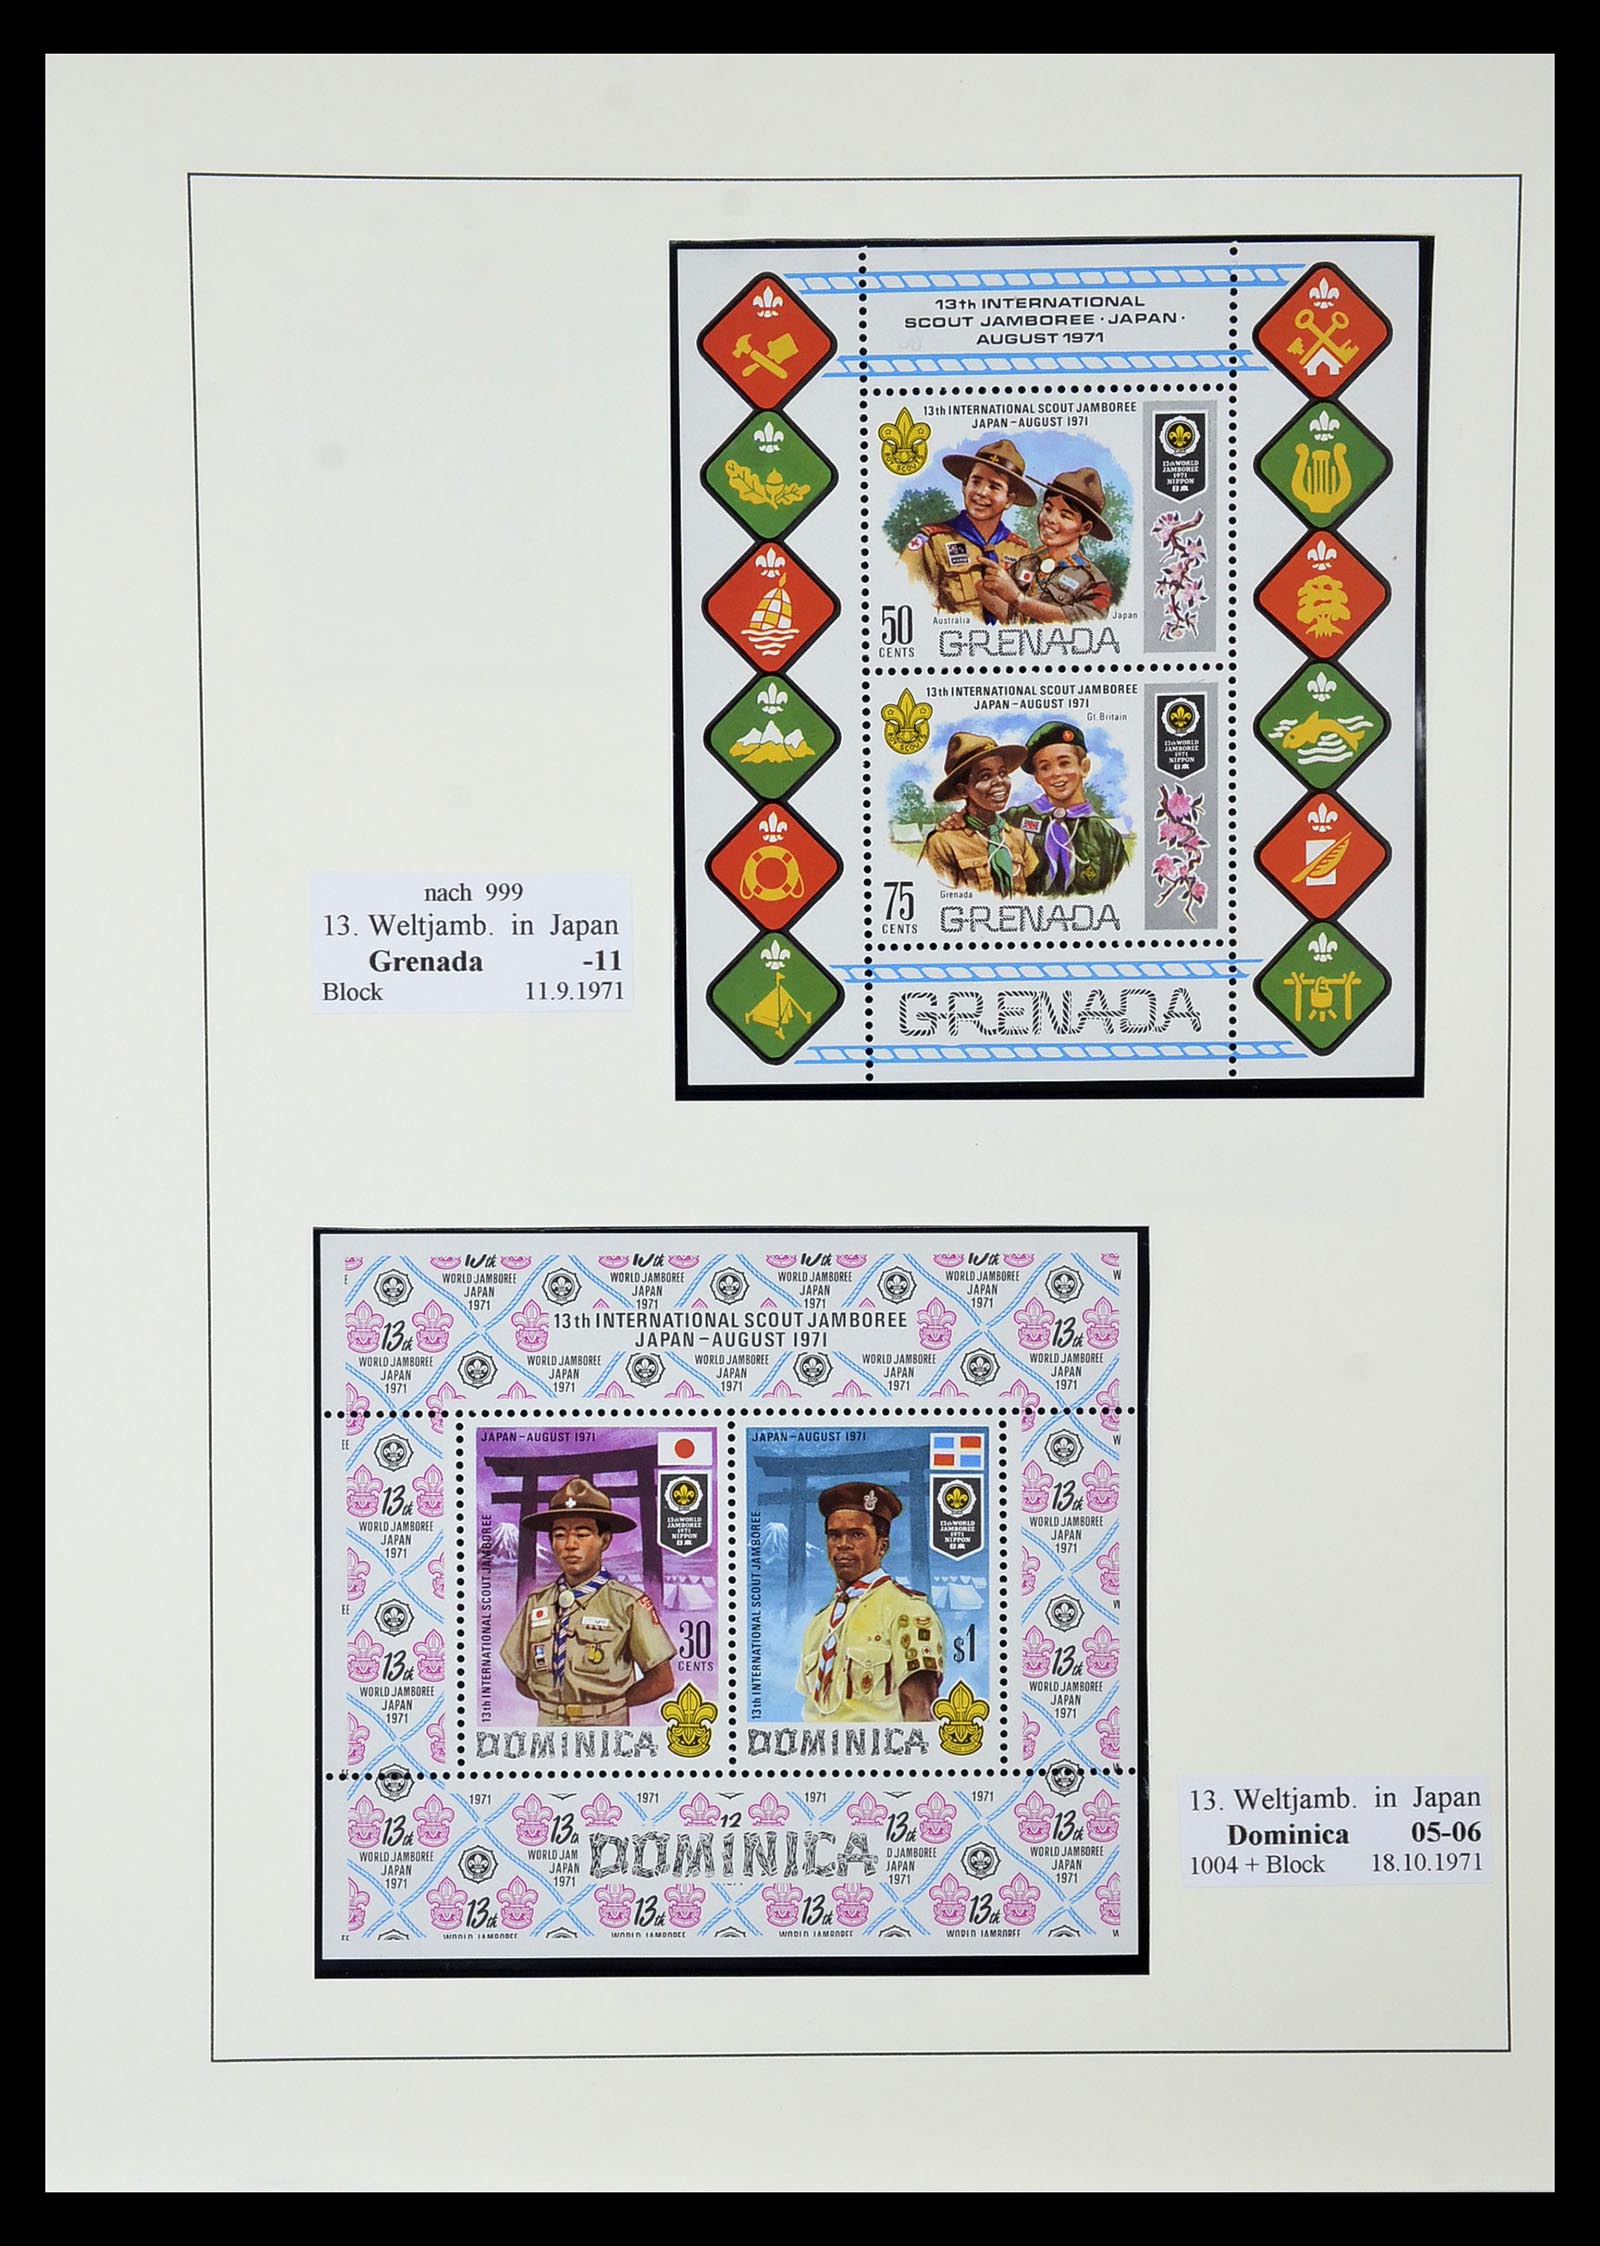 35069 093 - Stamp Collection 35069 Thematics Scouting 1925-2010.